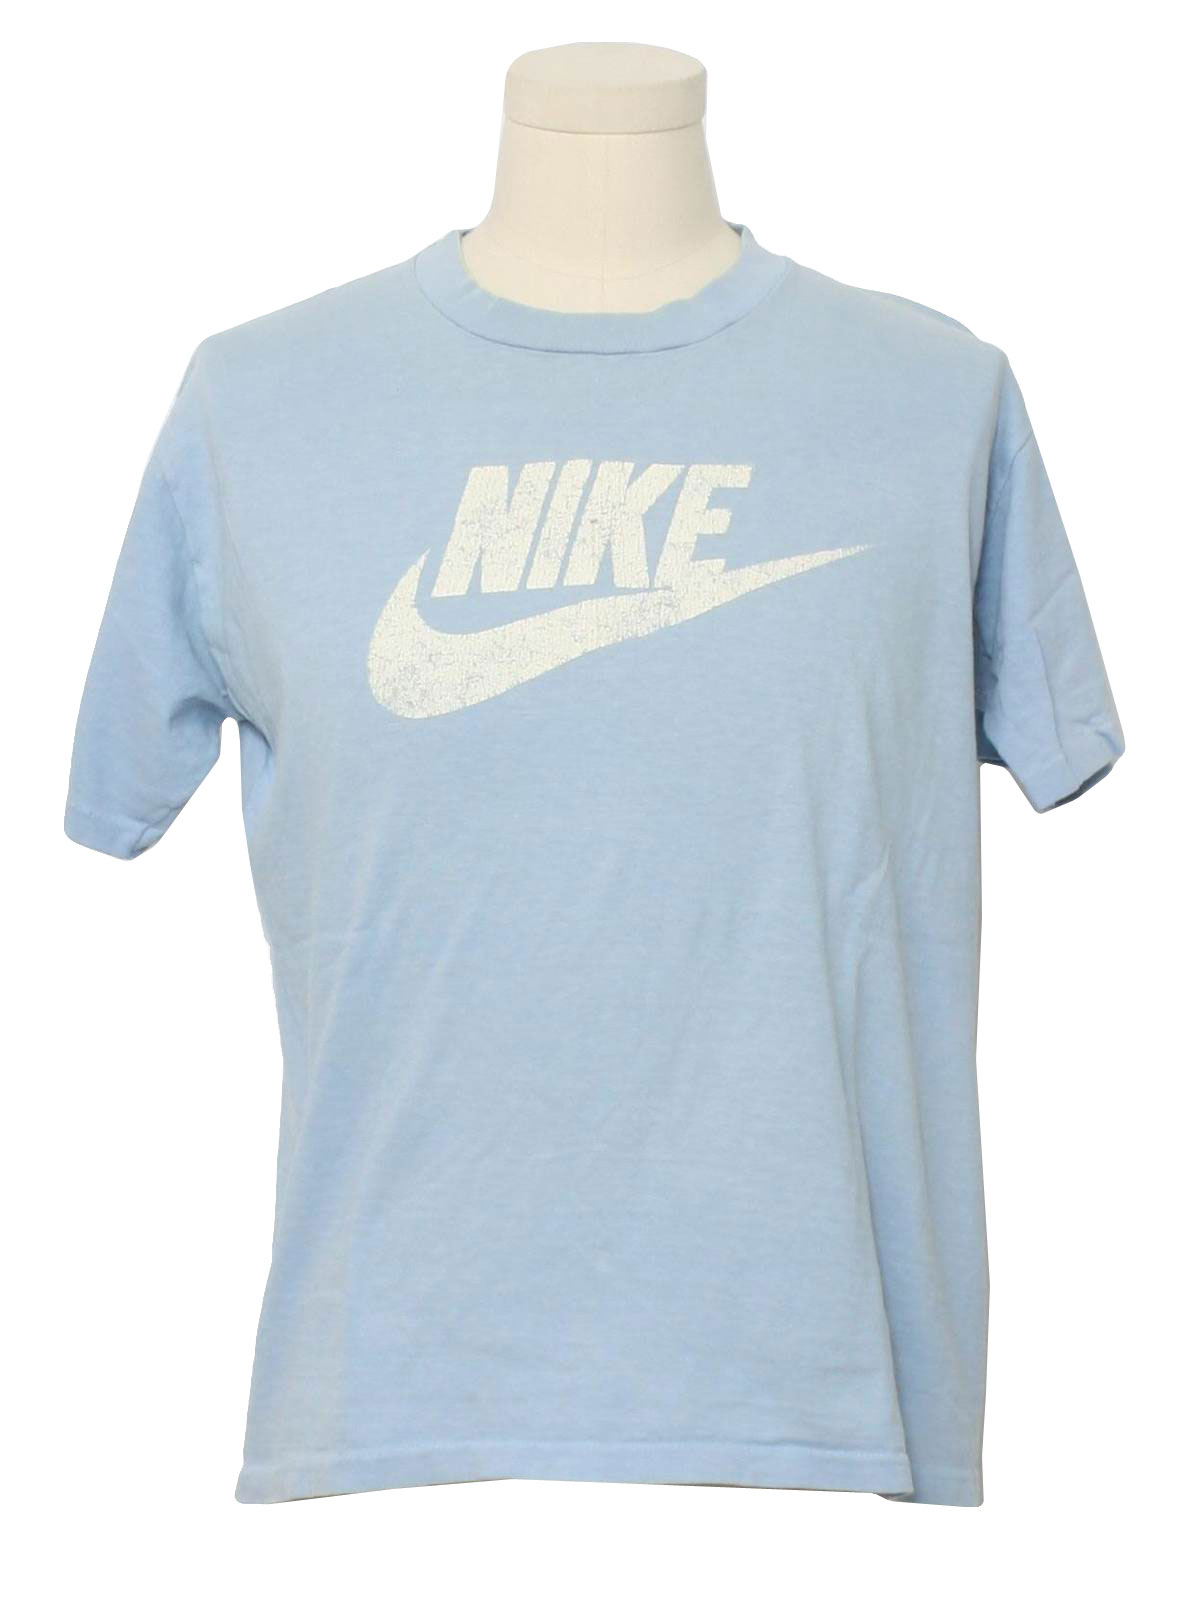 Seventies NIKE made in USA T Shirt: 70s -NIKE made in USA- Mens